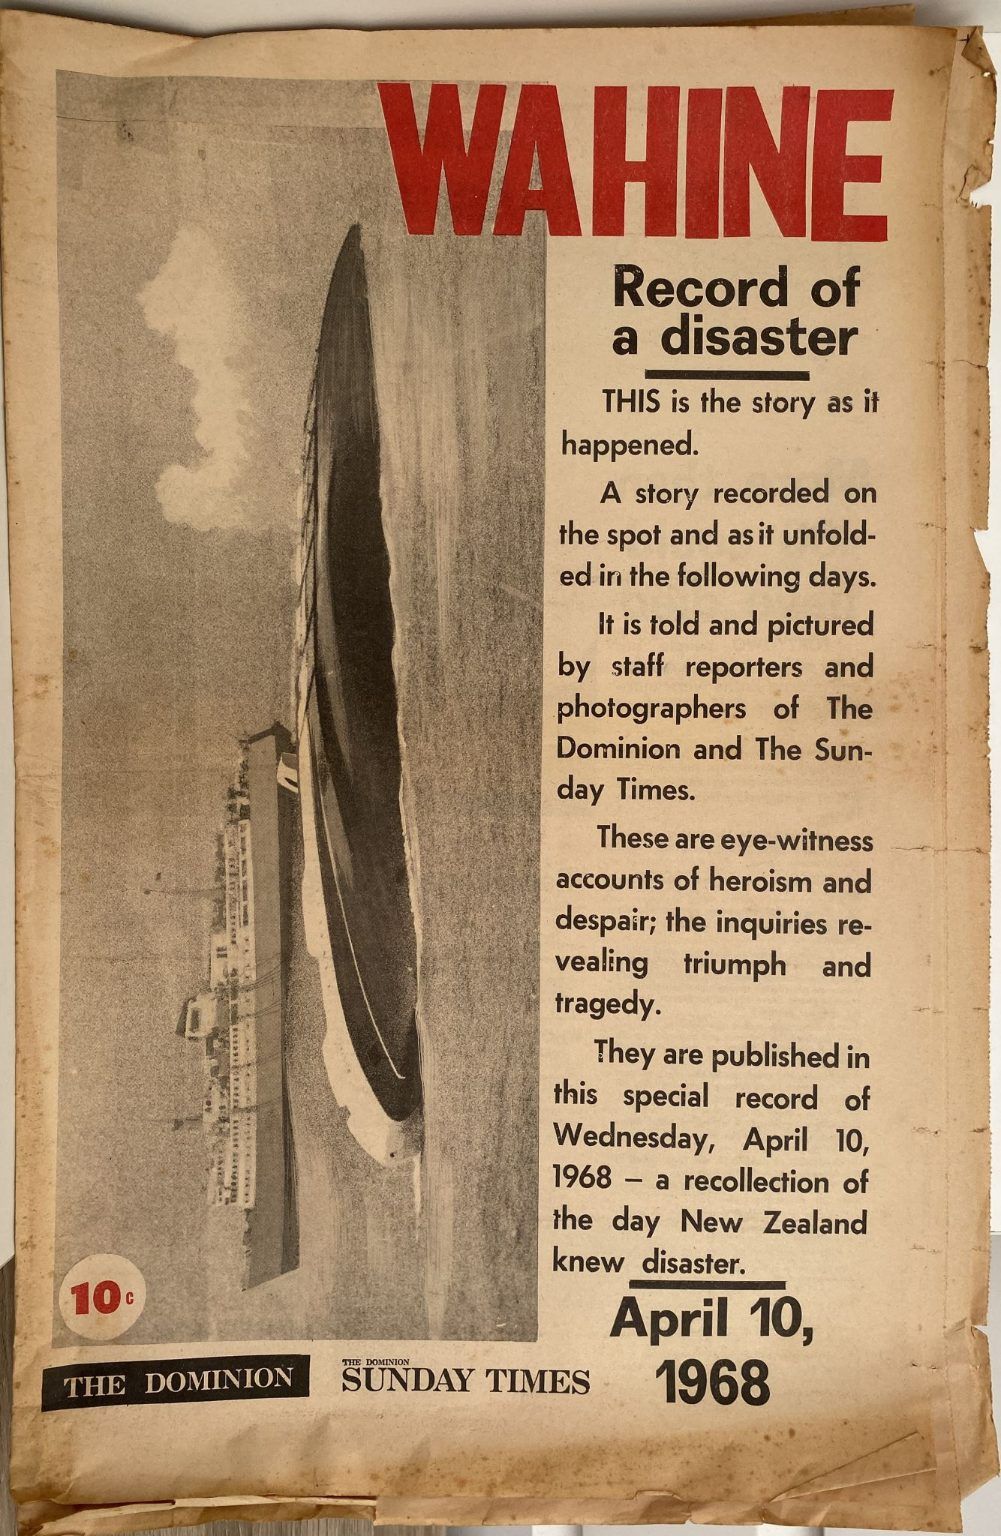 OLD NEWSPAPER: The Dominion Sunday Times 10 April 1968 - Wahine Disaster